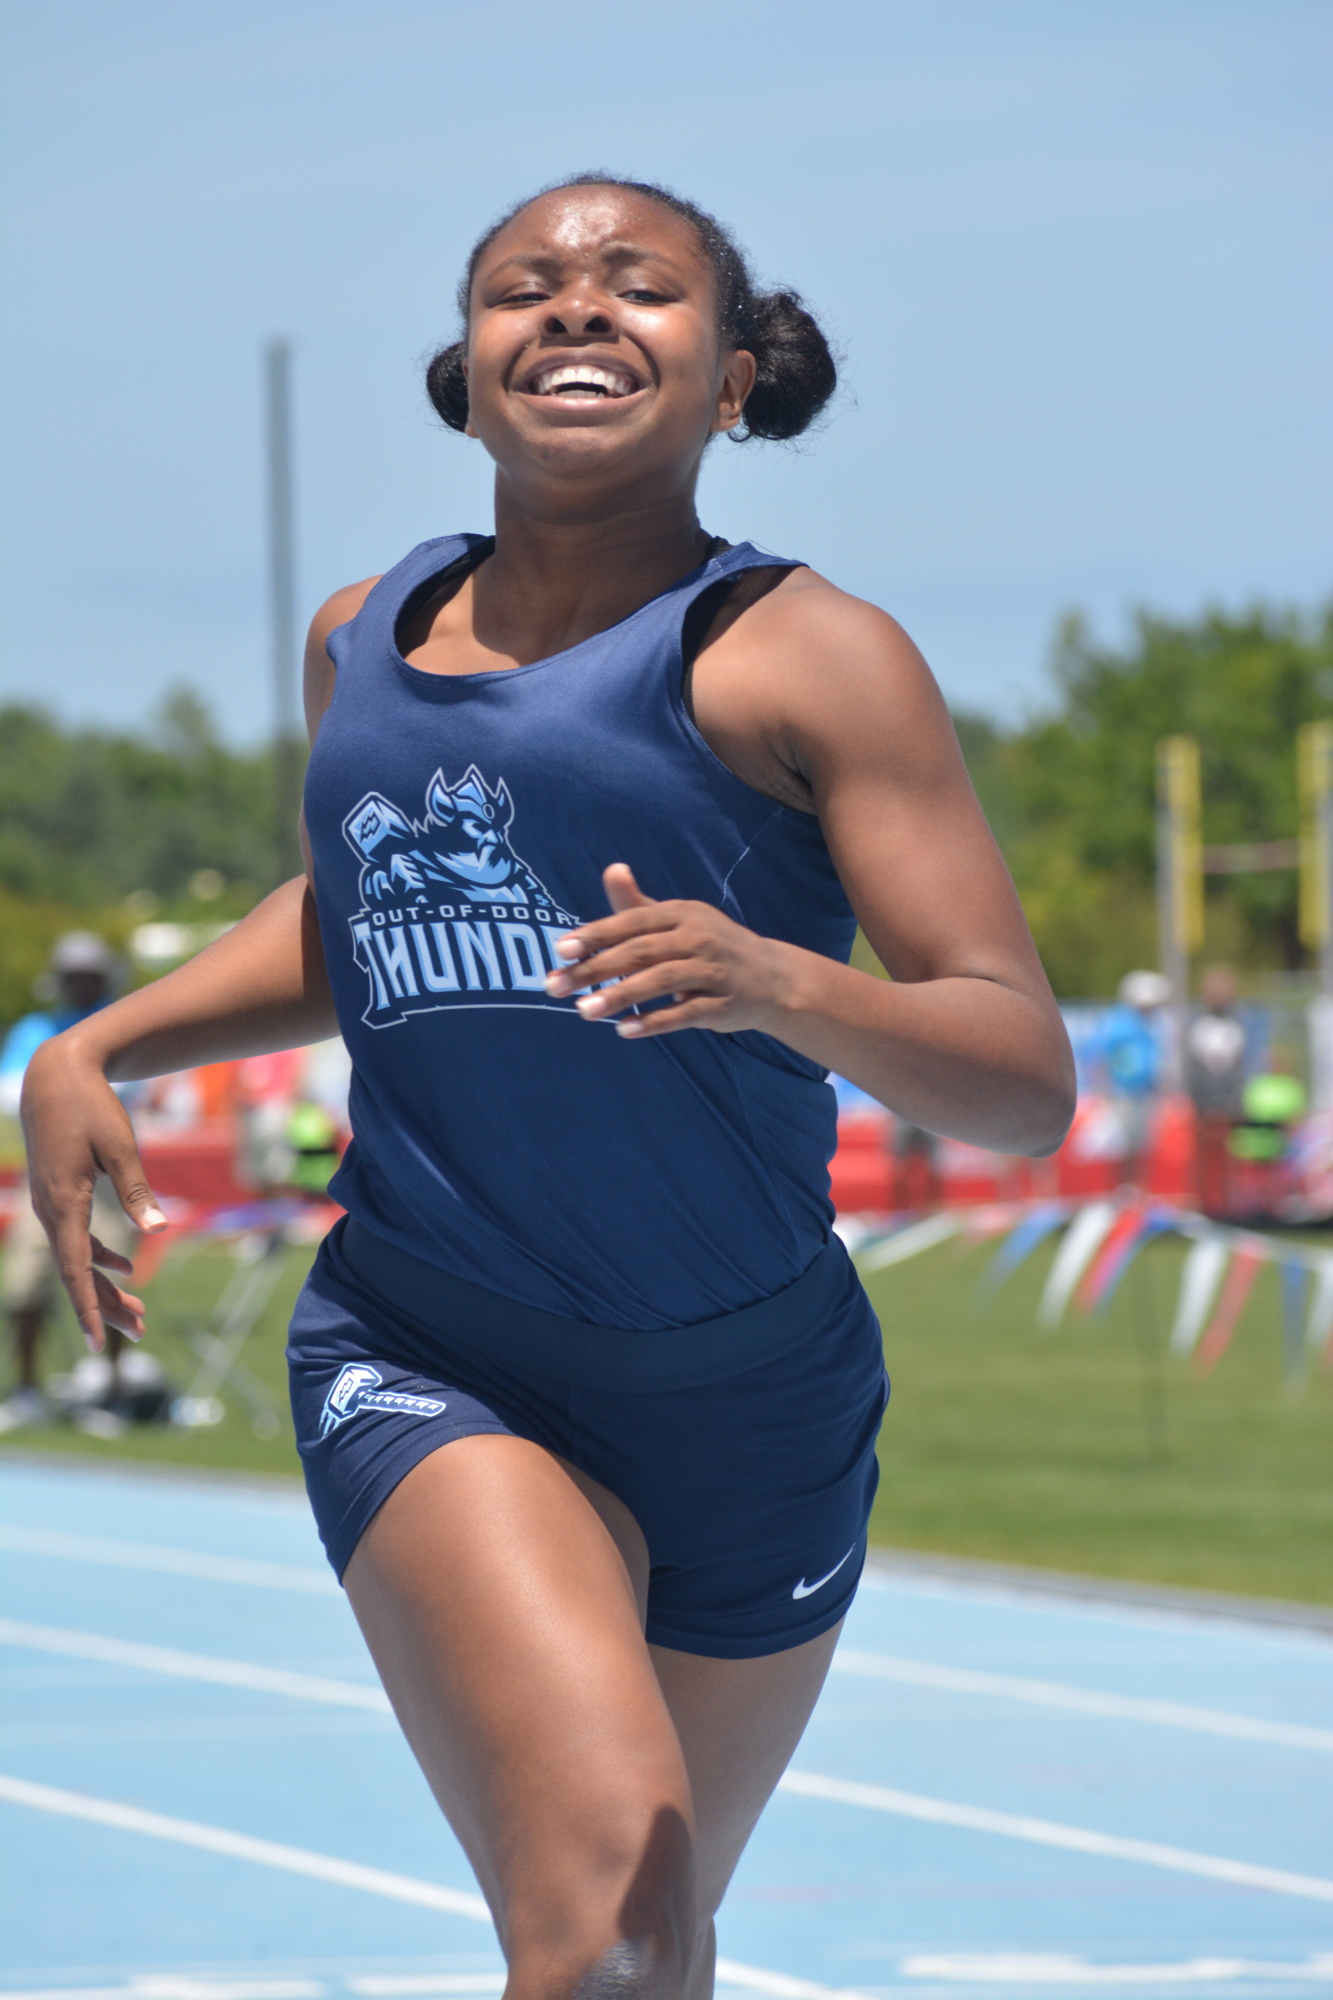 ODA freshman Saraiah Walkes smoked the competition in the 1A girls 100-meter dash (12.18 seconds).